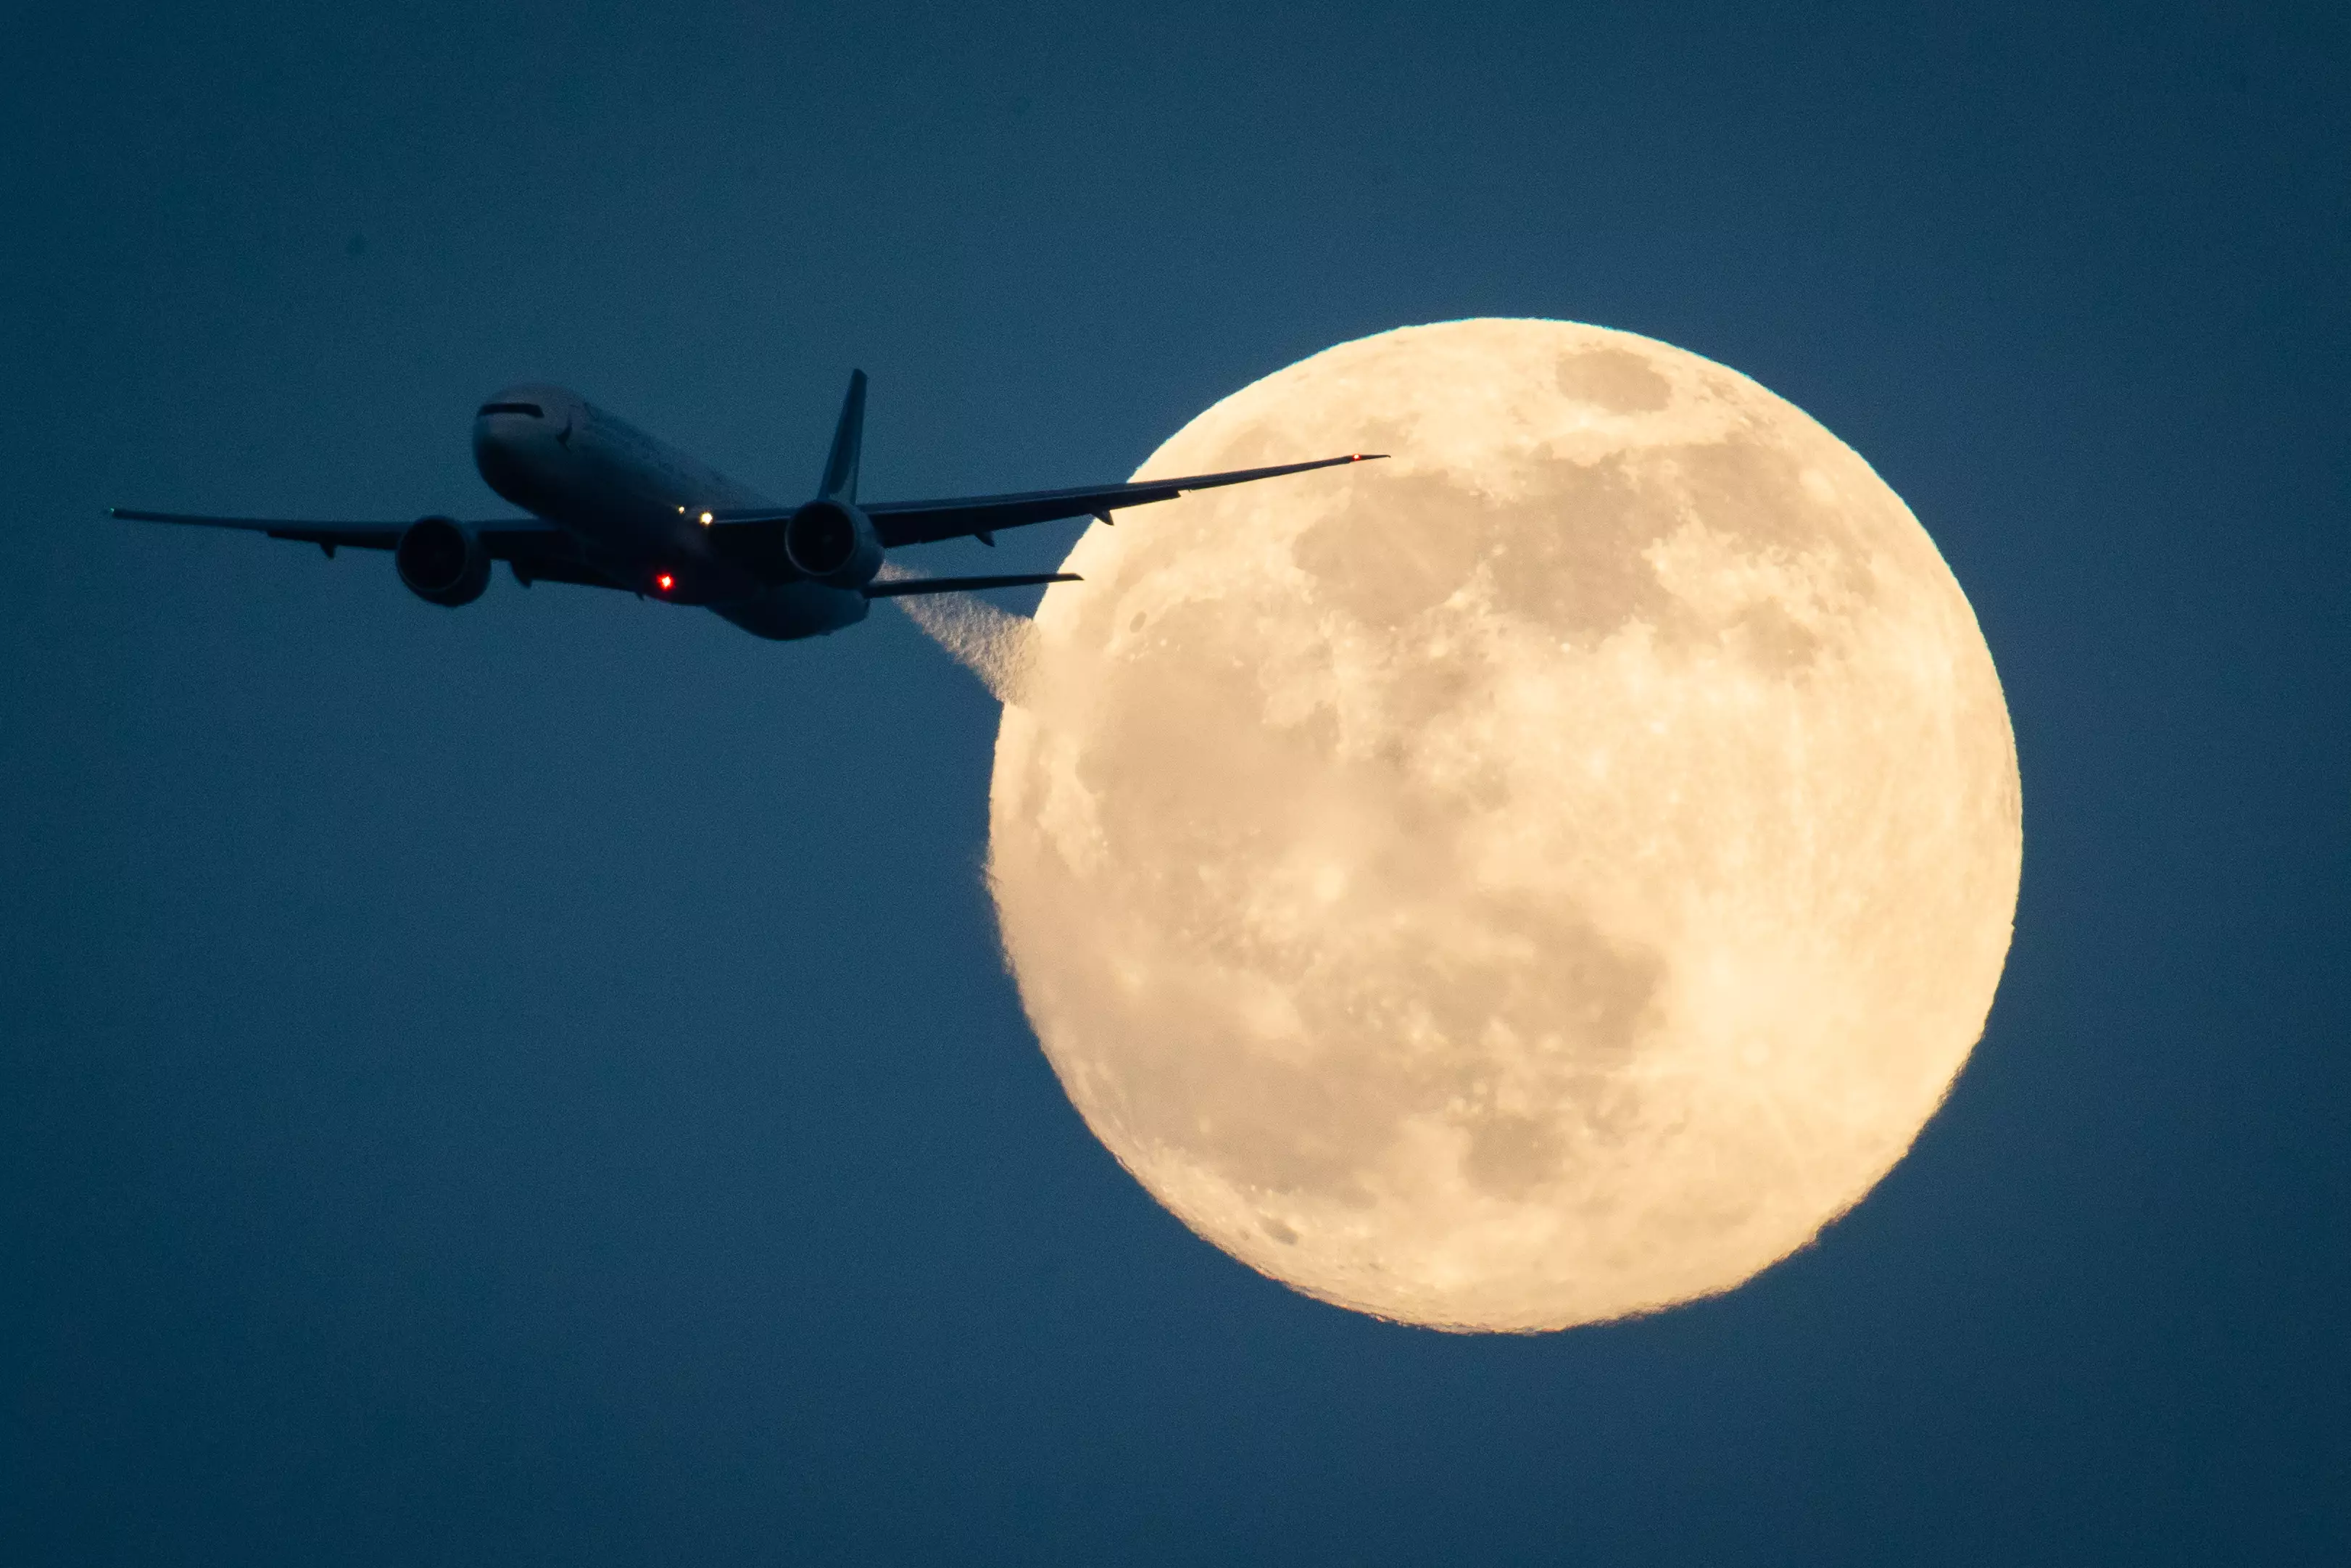 Did you know the full moon can affect your sleep? (